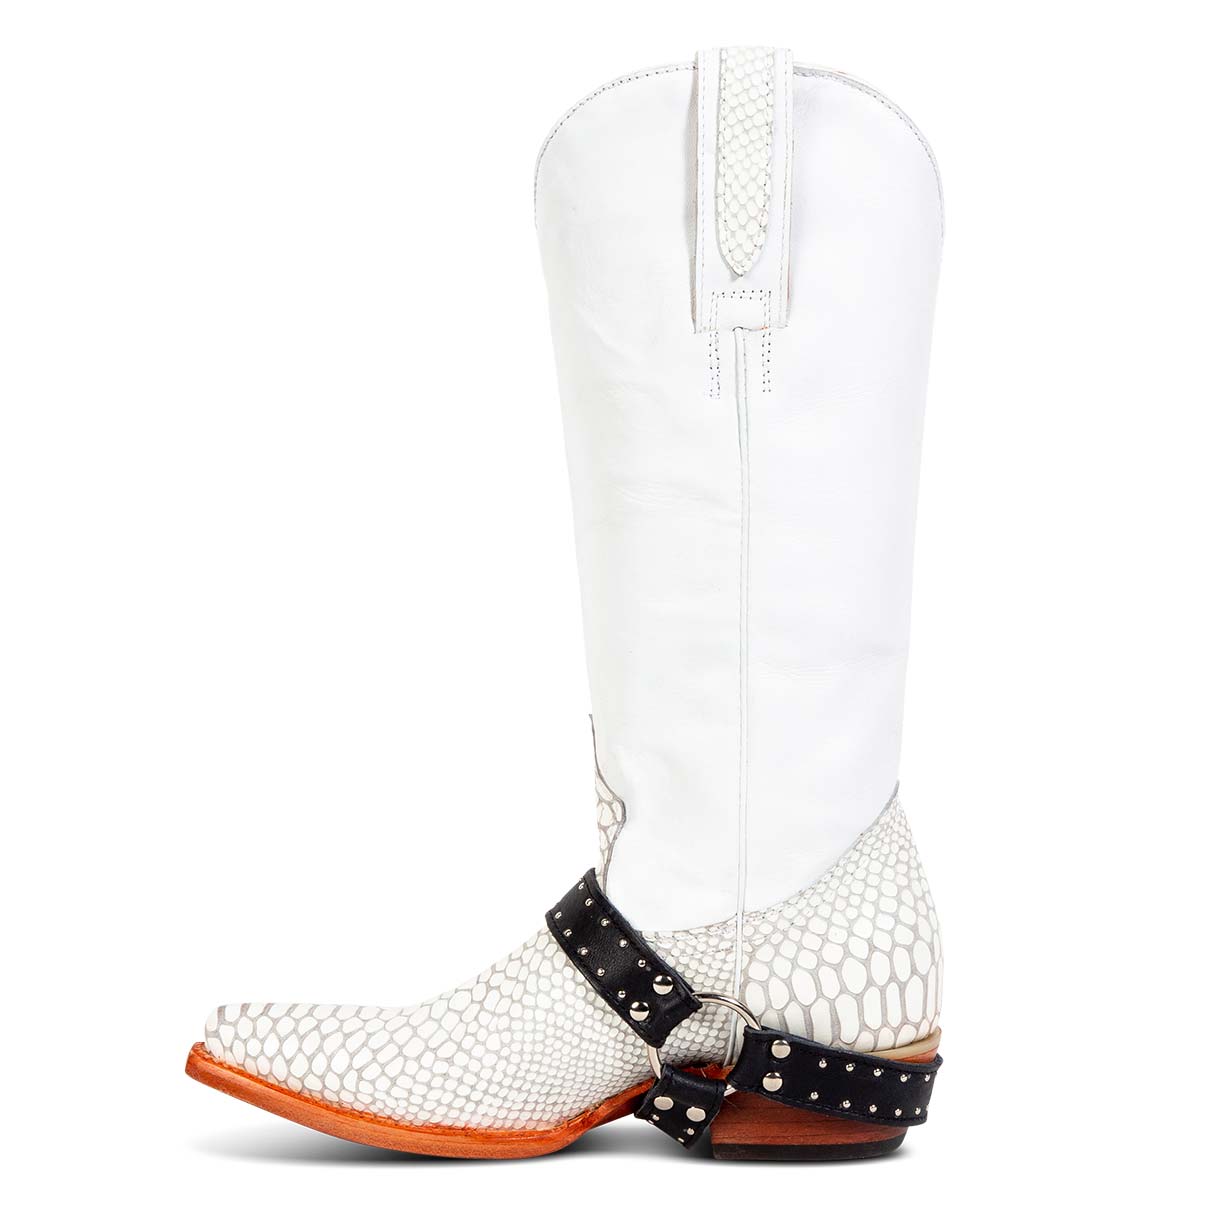 Inside view showing pull straps and western ankle harness on FREEBIRD women's Lusitano white snake boot